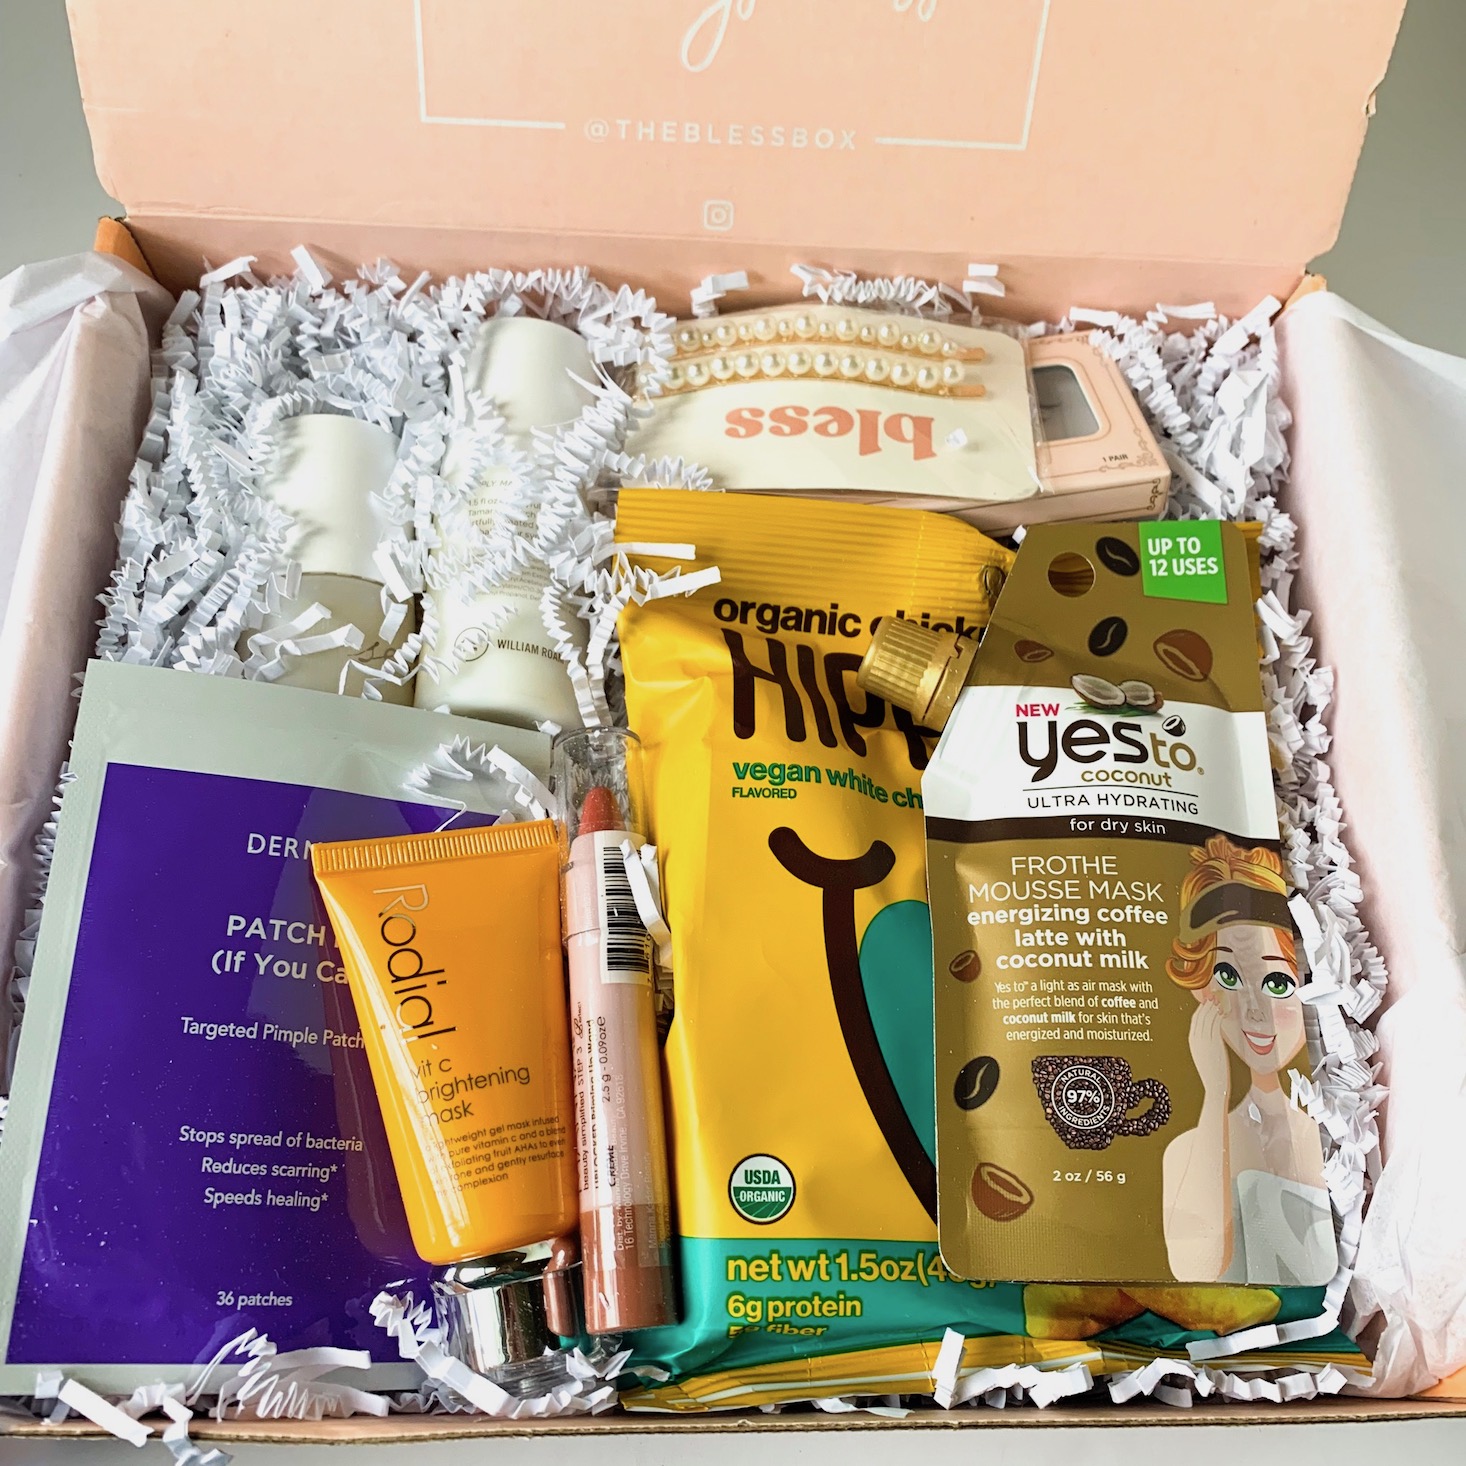 Bless Box Subscription Review + Coupon “Pot O’ Gold” – March 2019